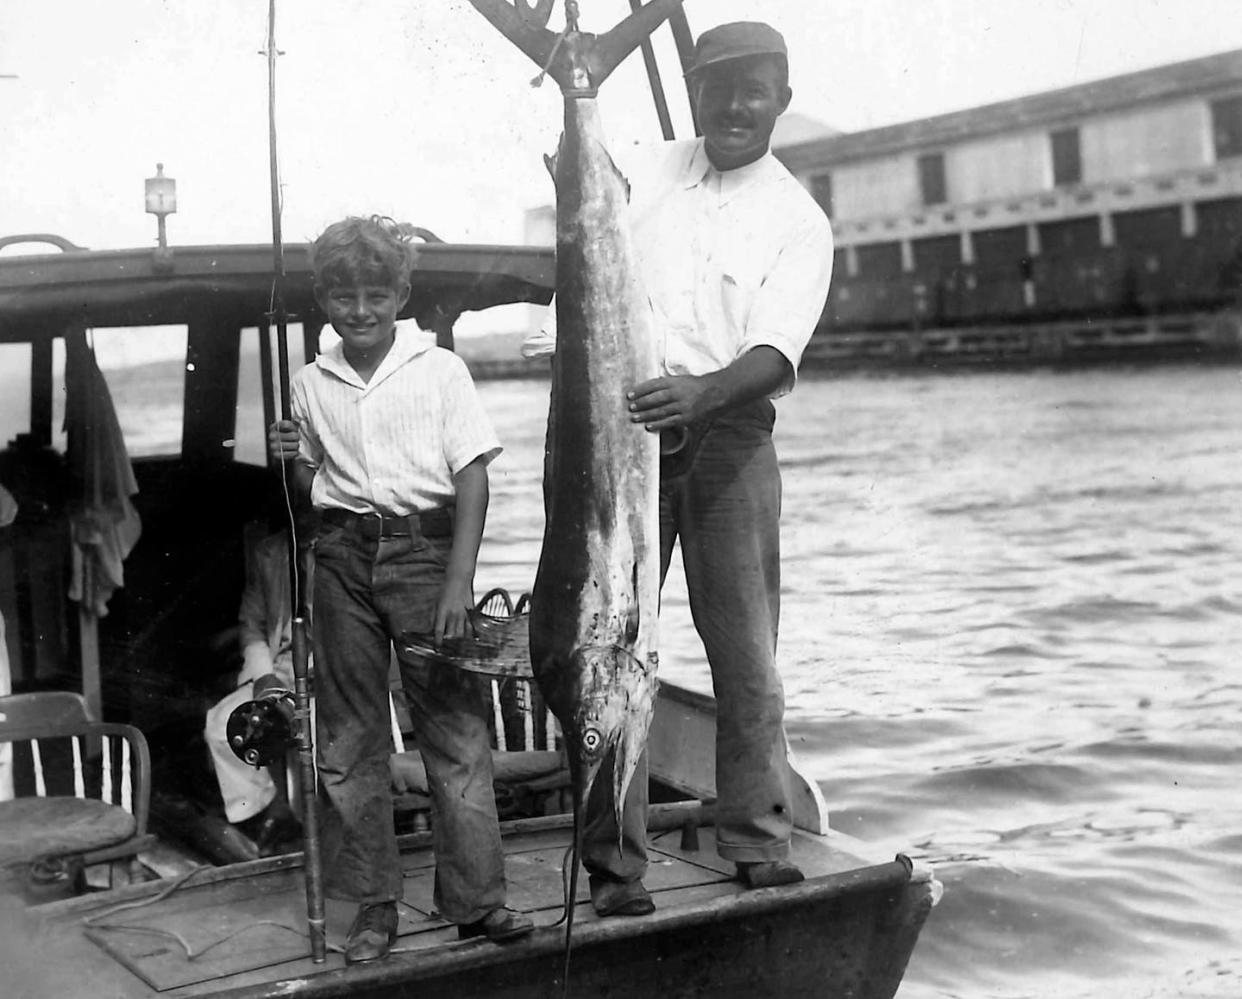 <span class="caption">Hemingway and his eldest son, Bumby, pose in Havana harbor in 1933.</span> <span class="attribution"><span class="source">Collection of David Meeker</span>, <span class="license">Author provided</span></span>